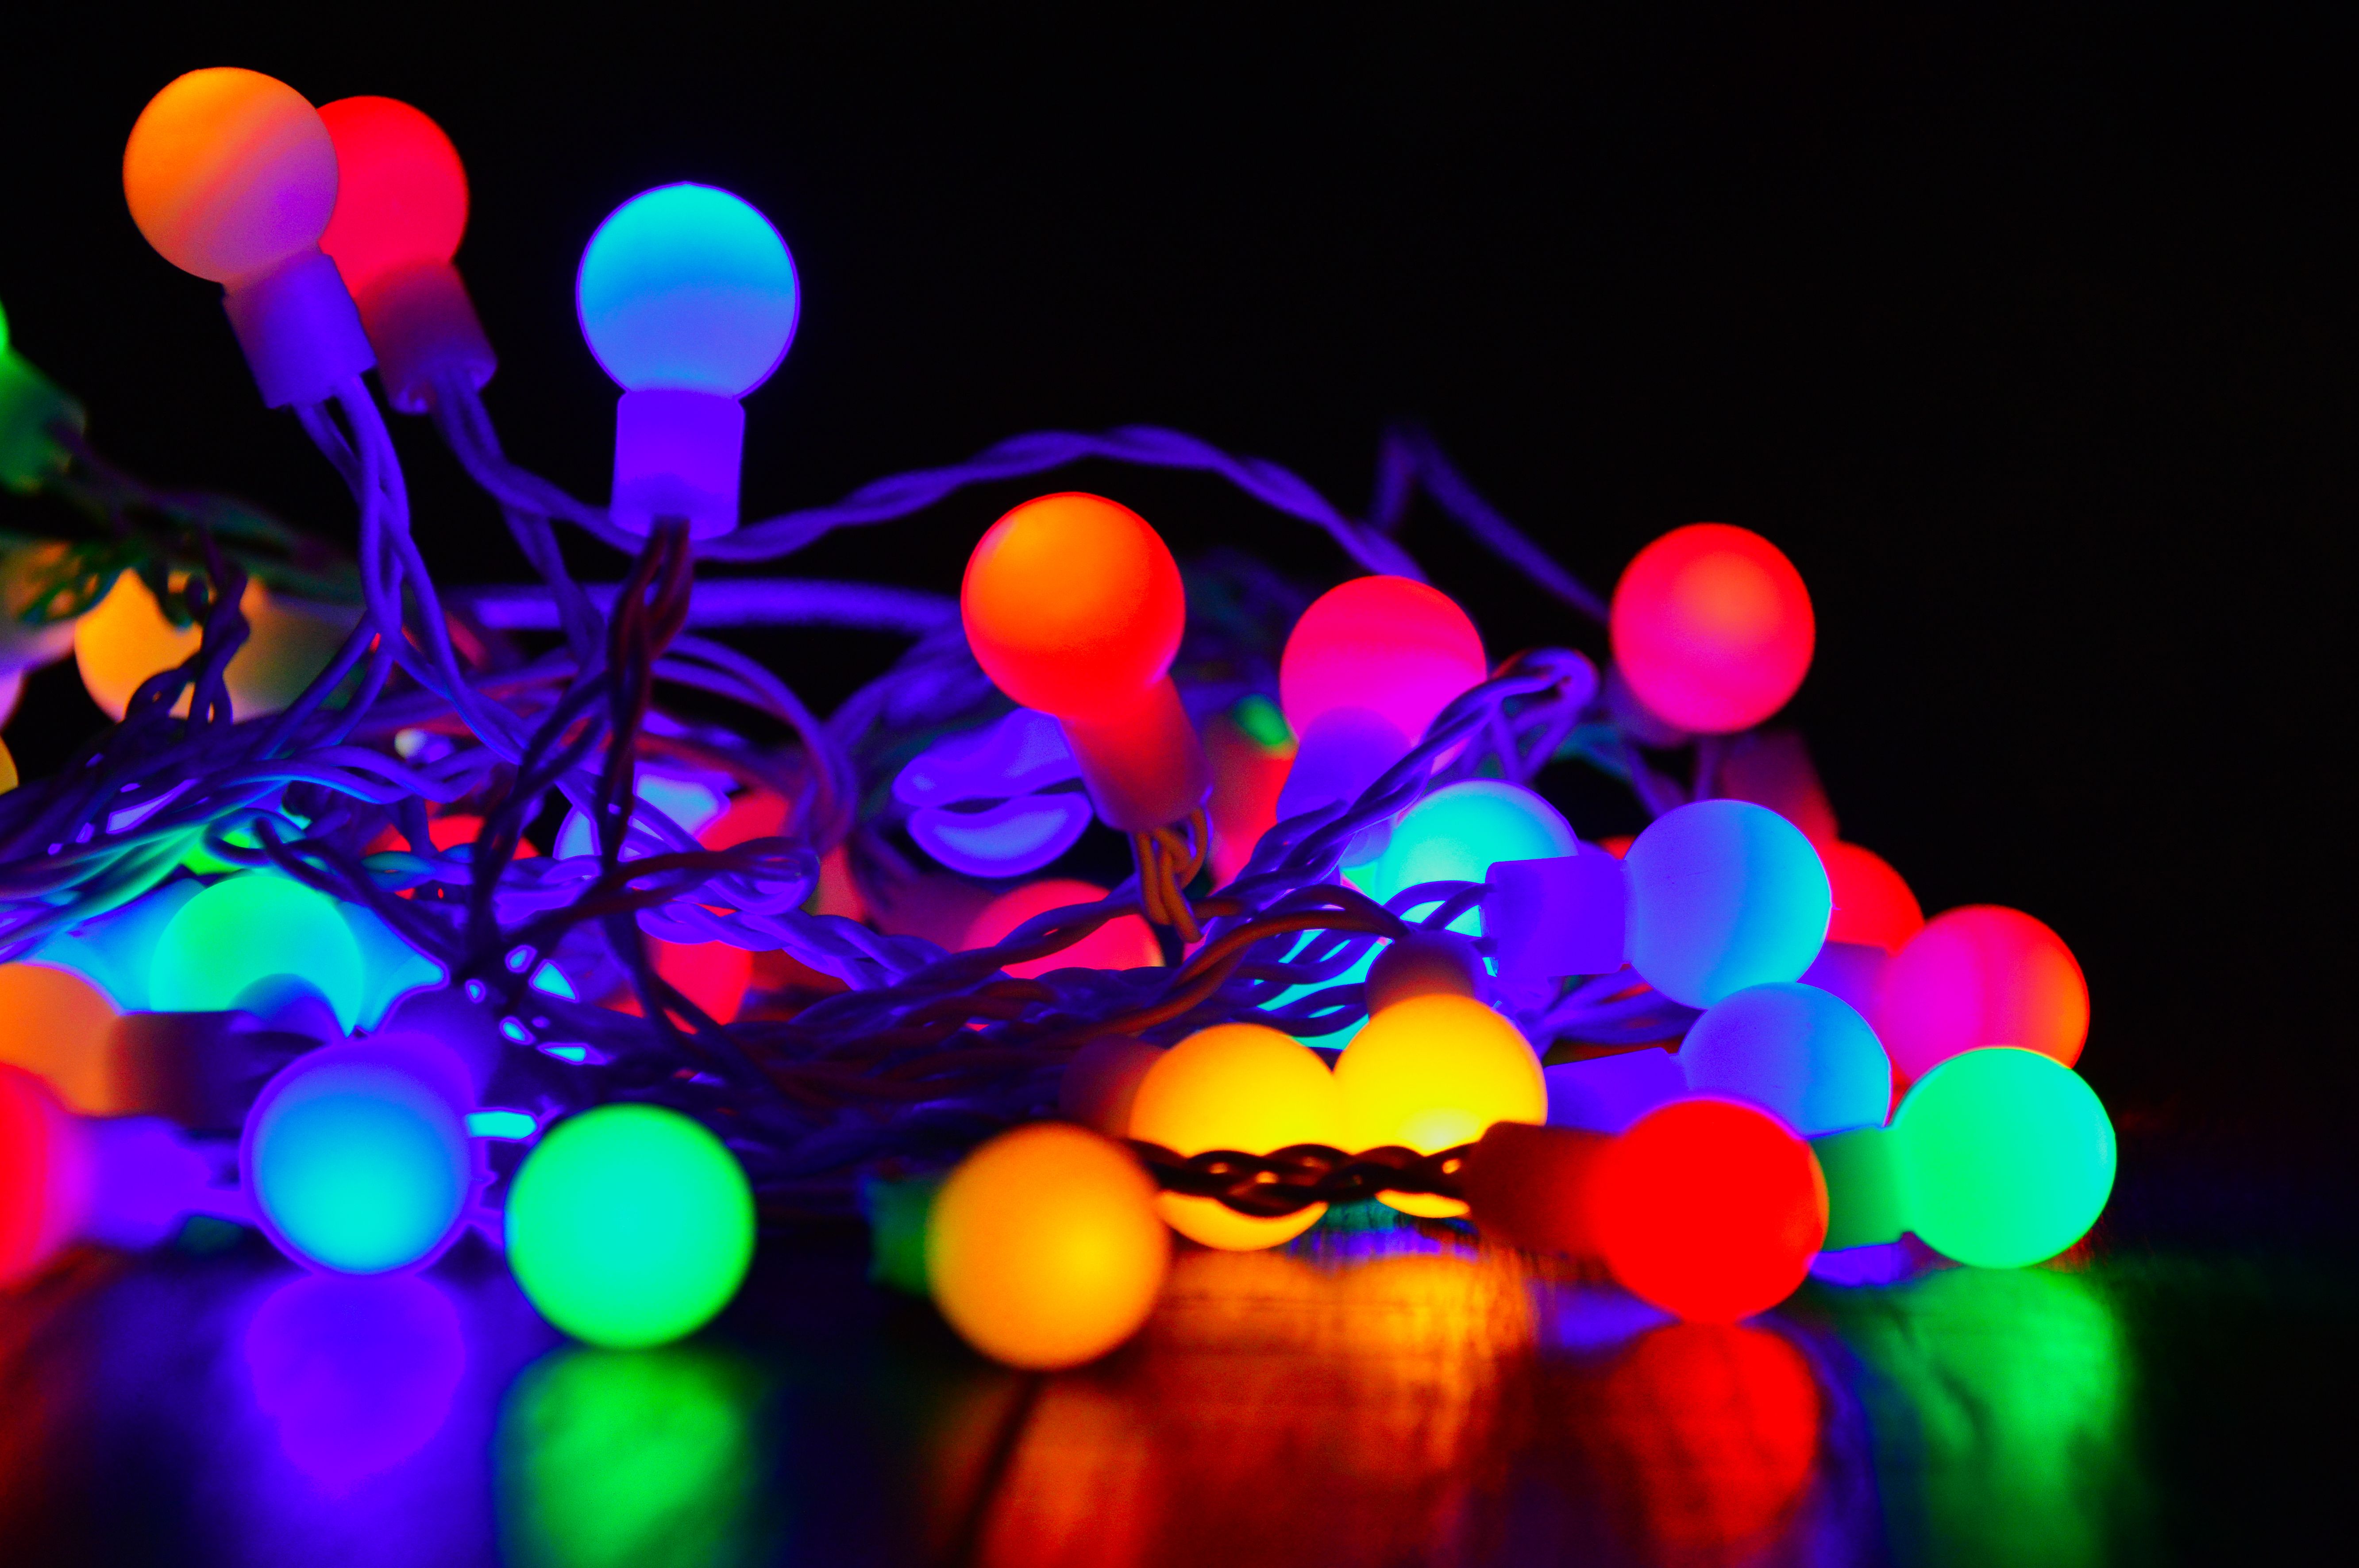 Free Image, light, background, bulb, colorful, string, abstract, bright, holiday, celebration, color, depth, bulbs, blue, decoration, vector, glowing, festive, field, celebratory, white, illustration, design, lighting, night, computer wallpaper, neon